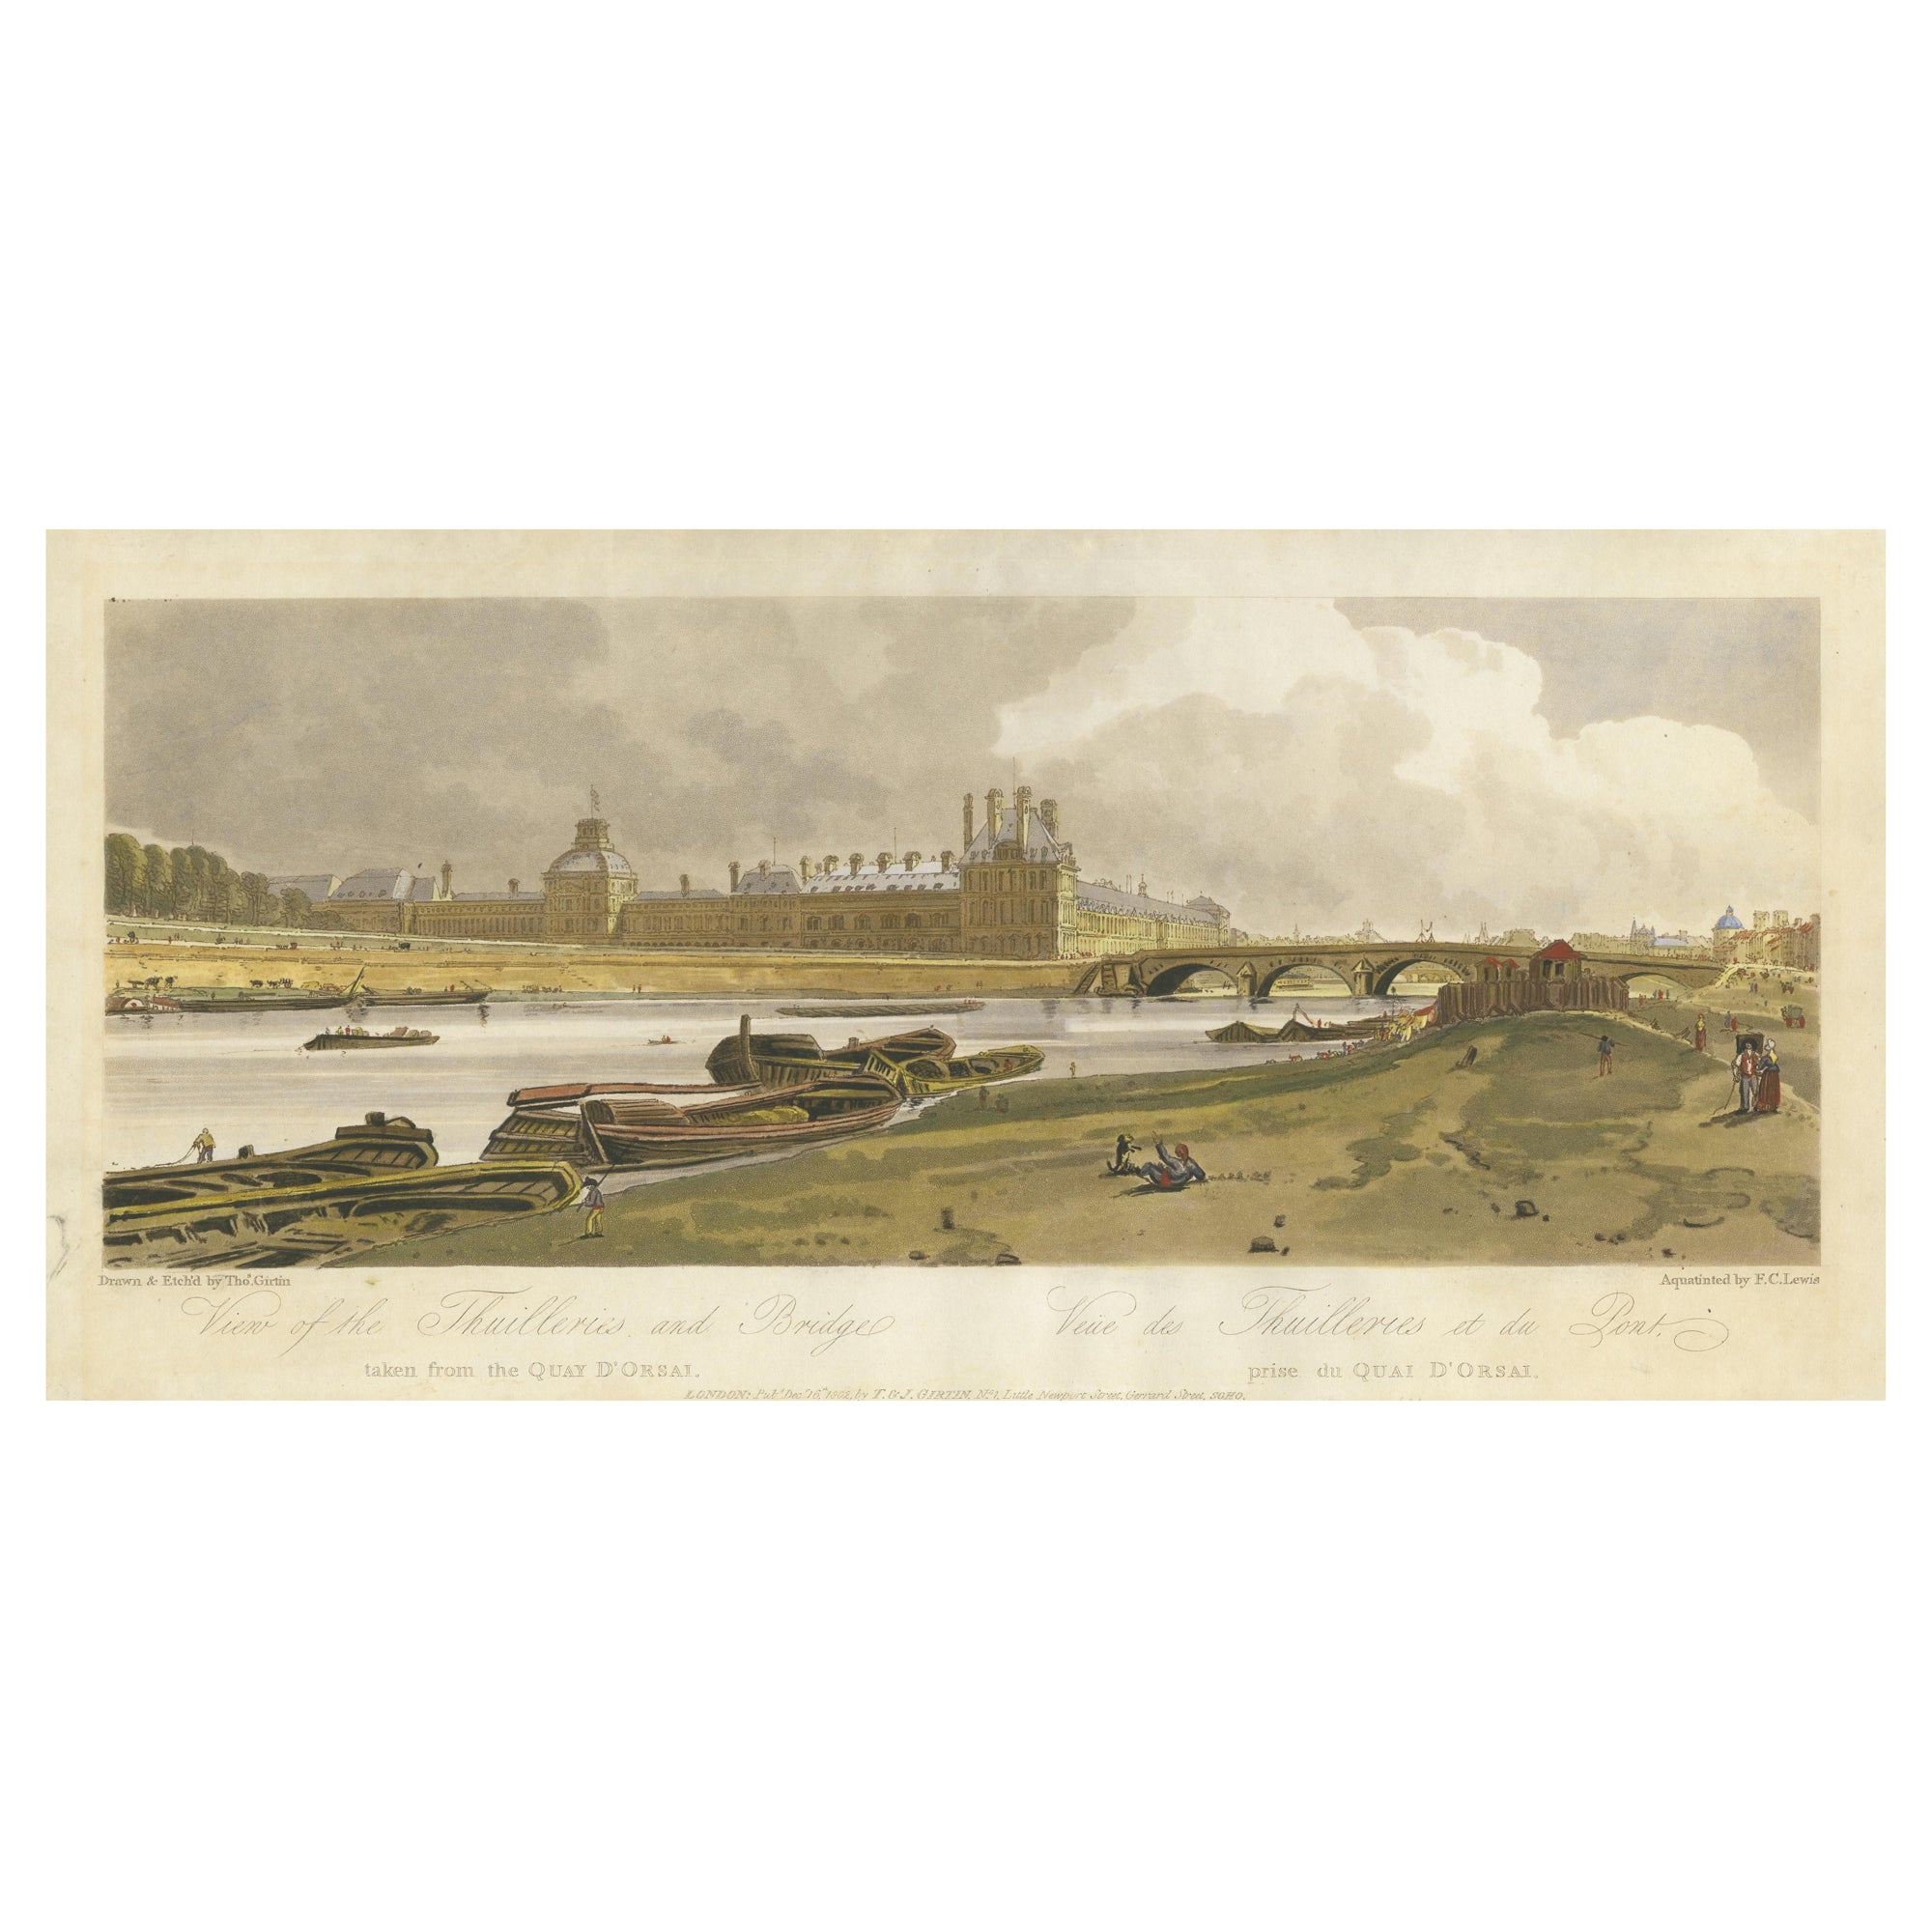 Antique Print with a View of Tuileries Palace, Paris, France, 1802